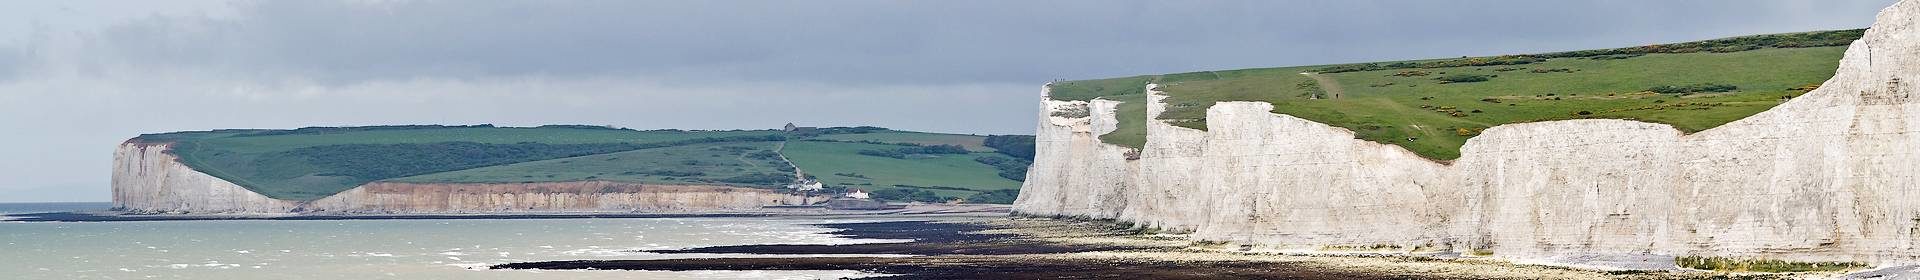 Cliffs on the English channel